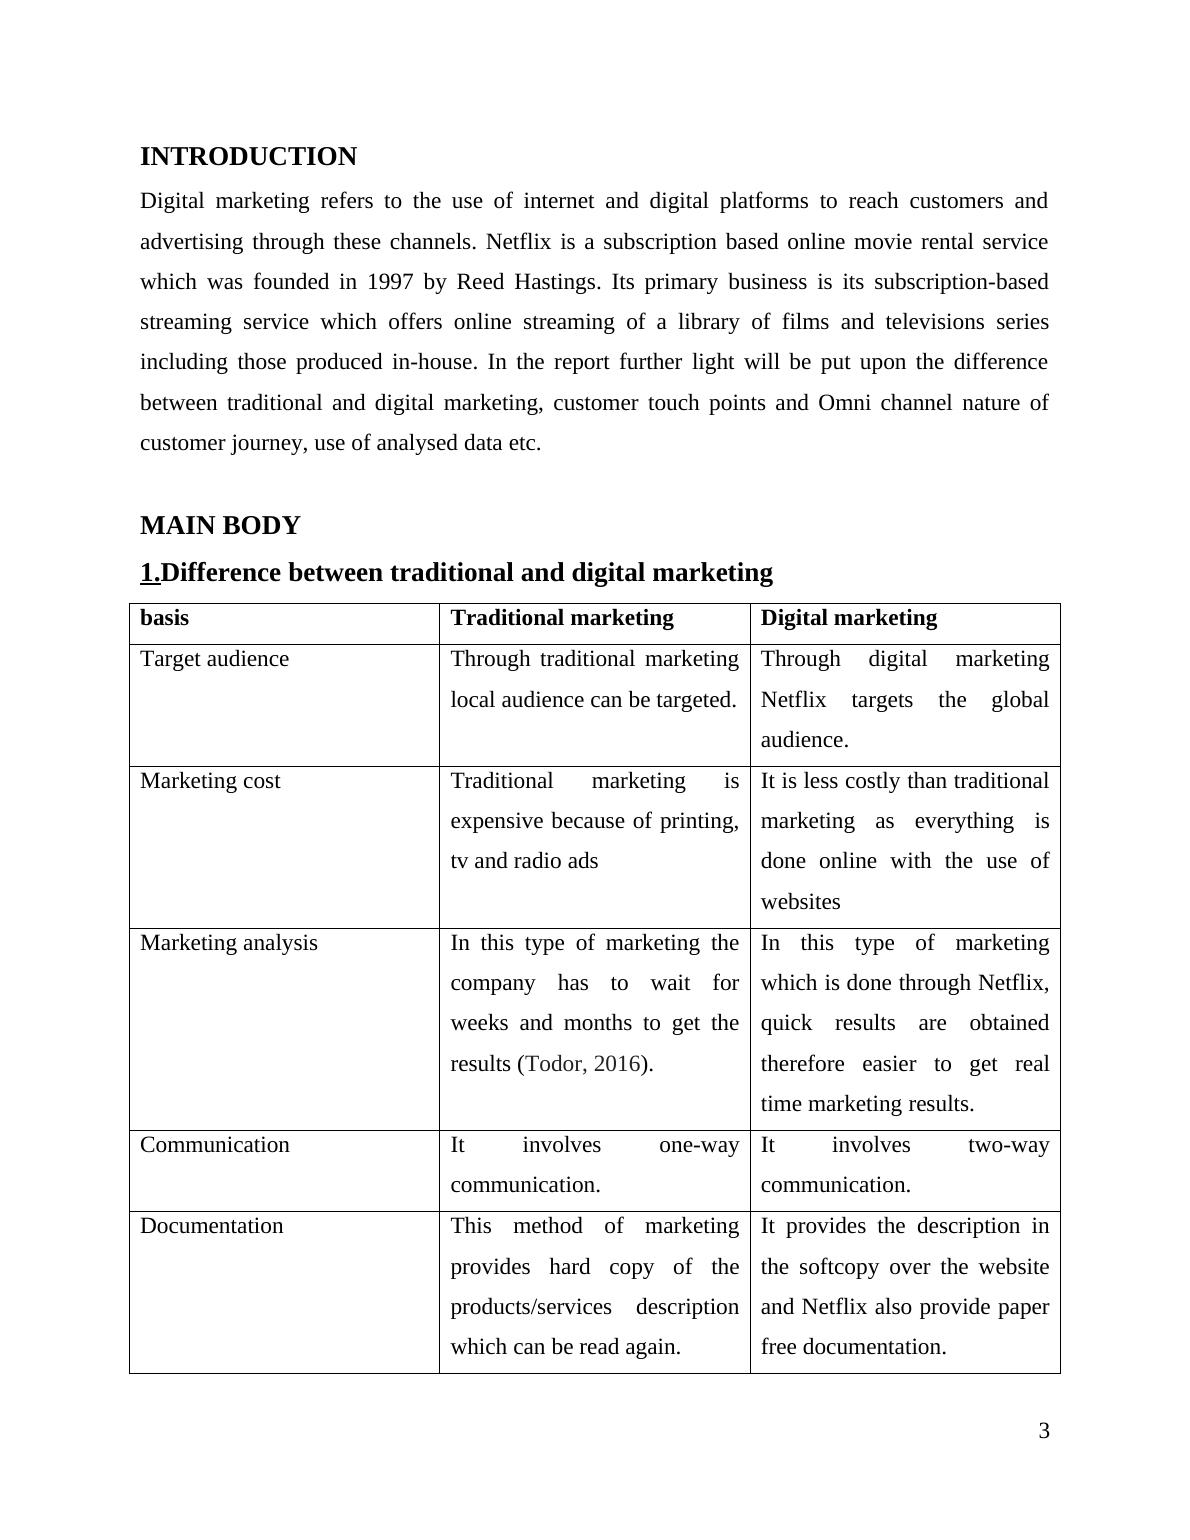 Difference between traditional and digital marketing_3